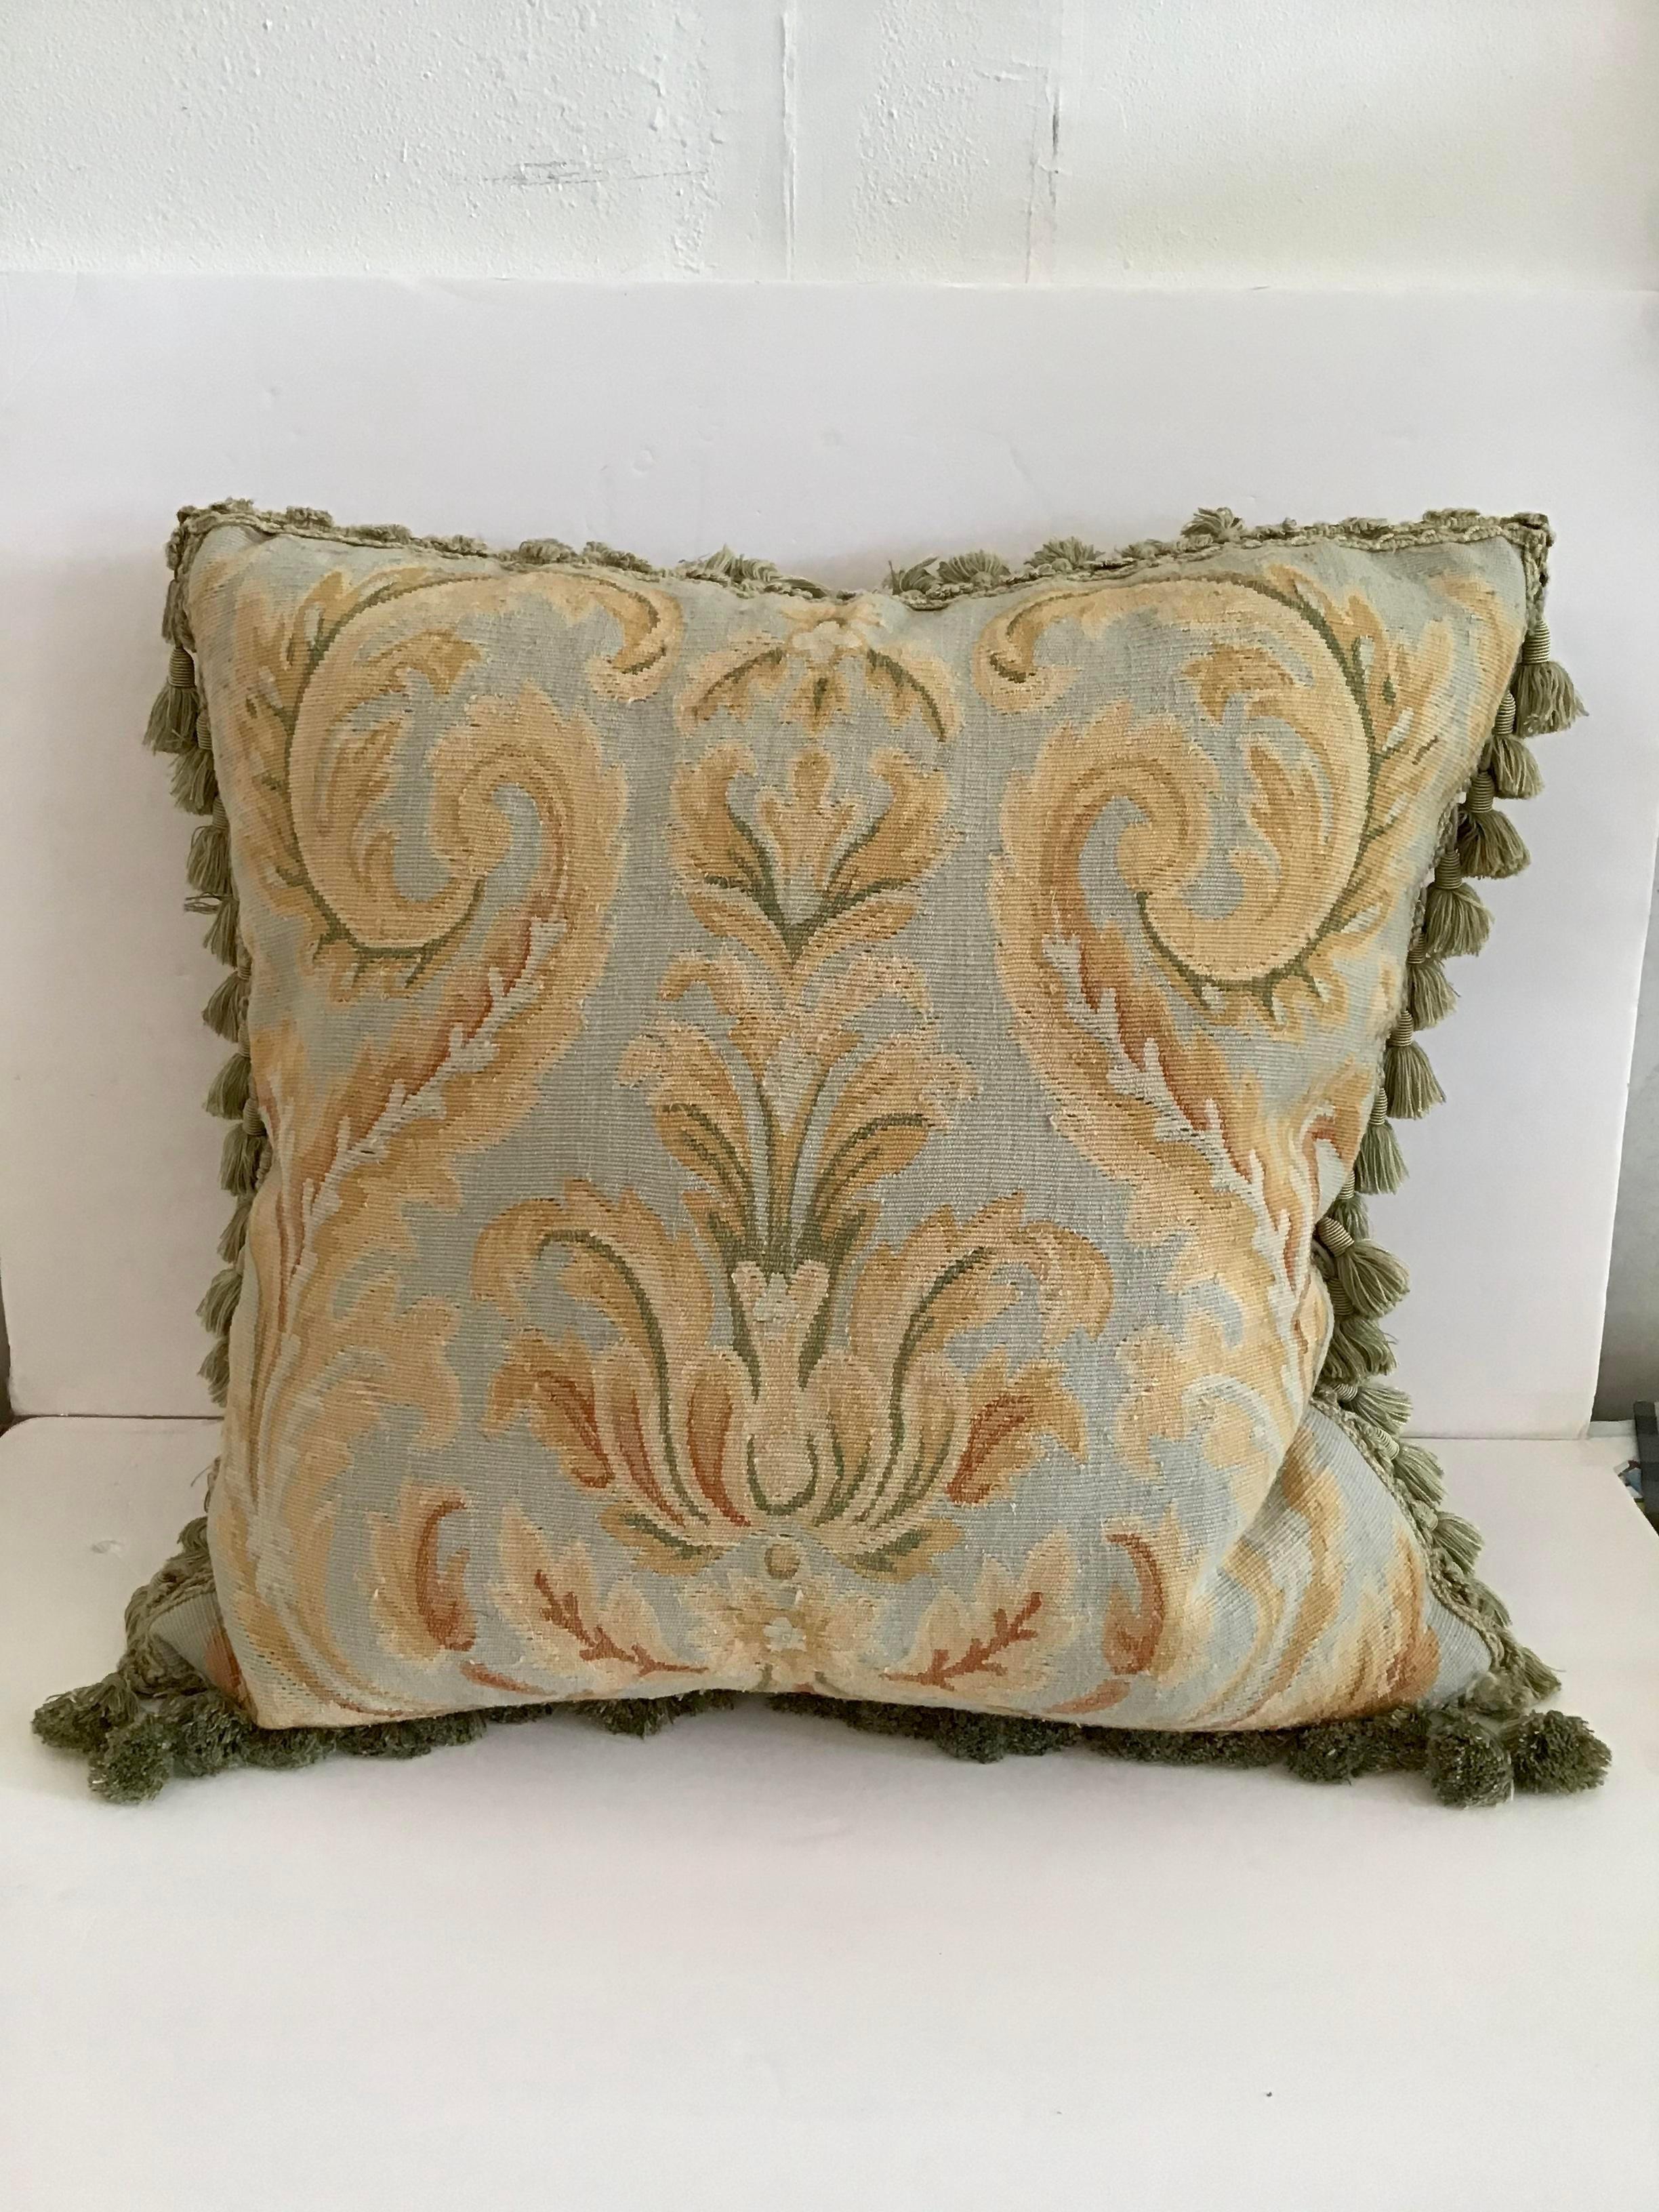 Gorgeous handwork on this Aubusson down pillow with decorative fringe. Add some chic style to your decor. Includes the down insert.